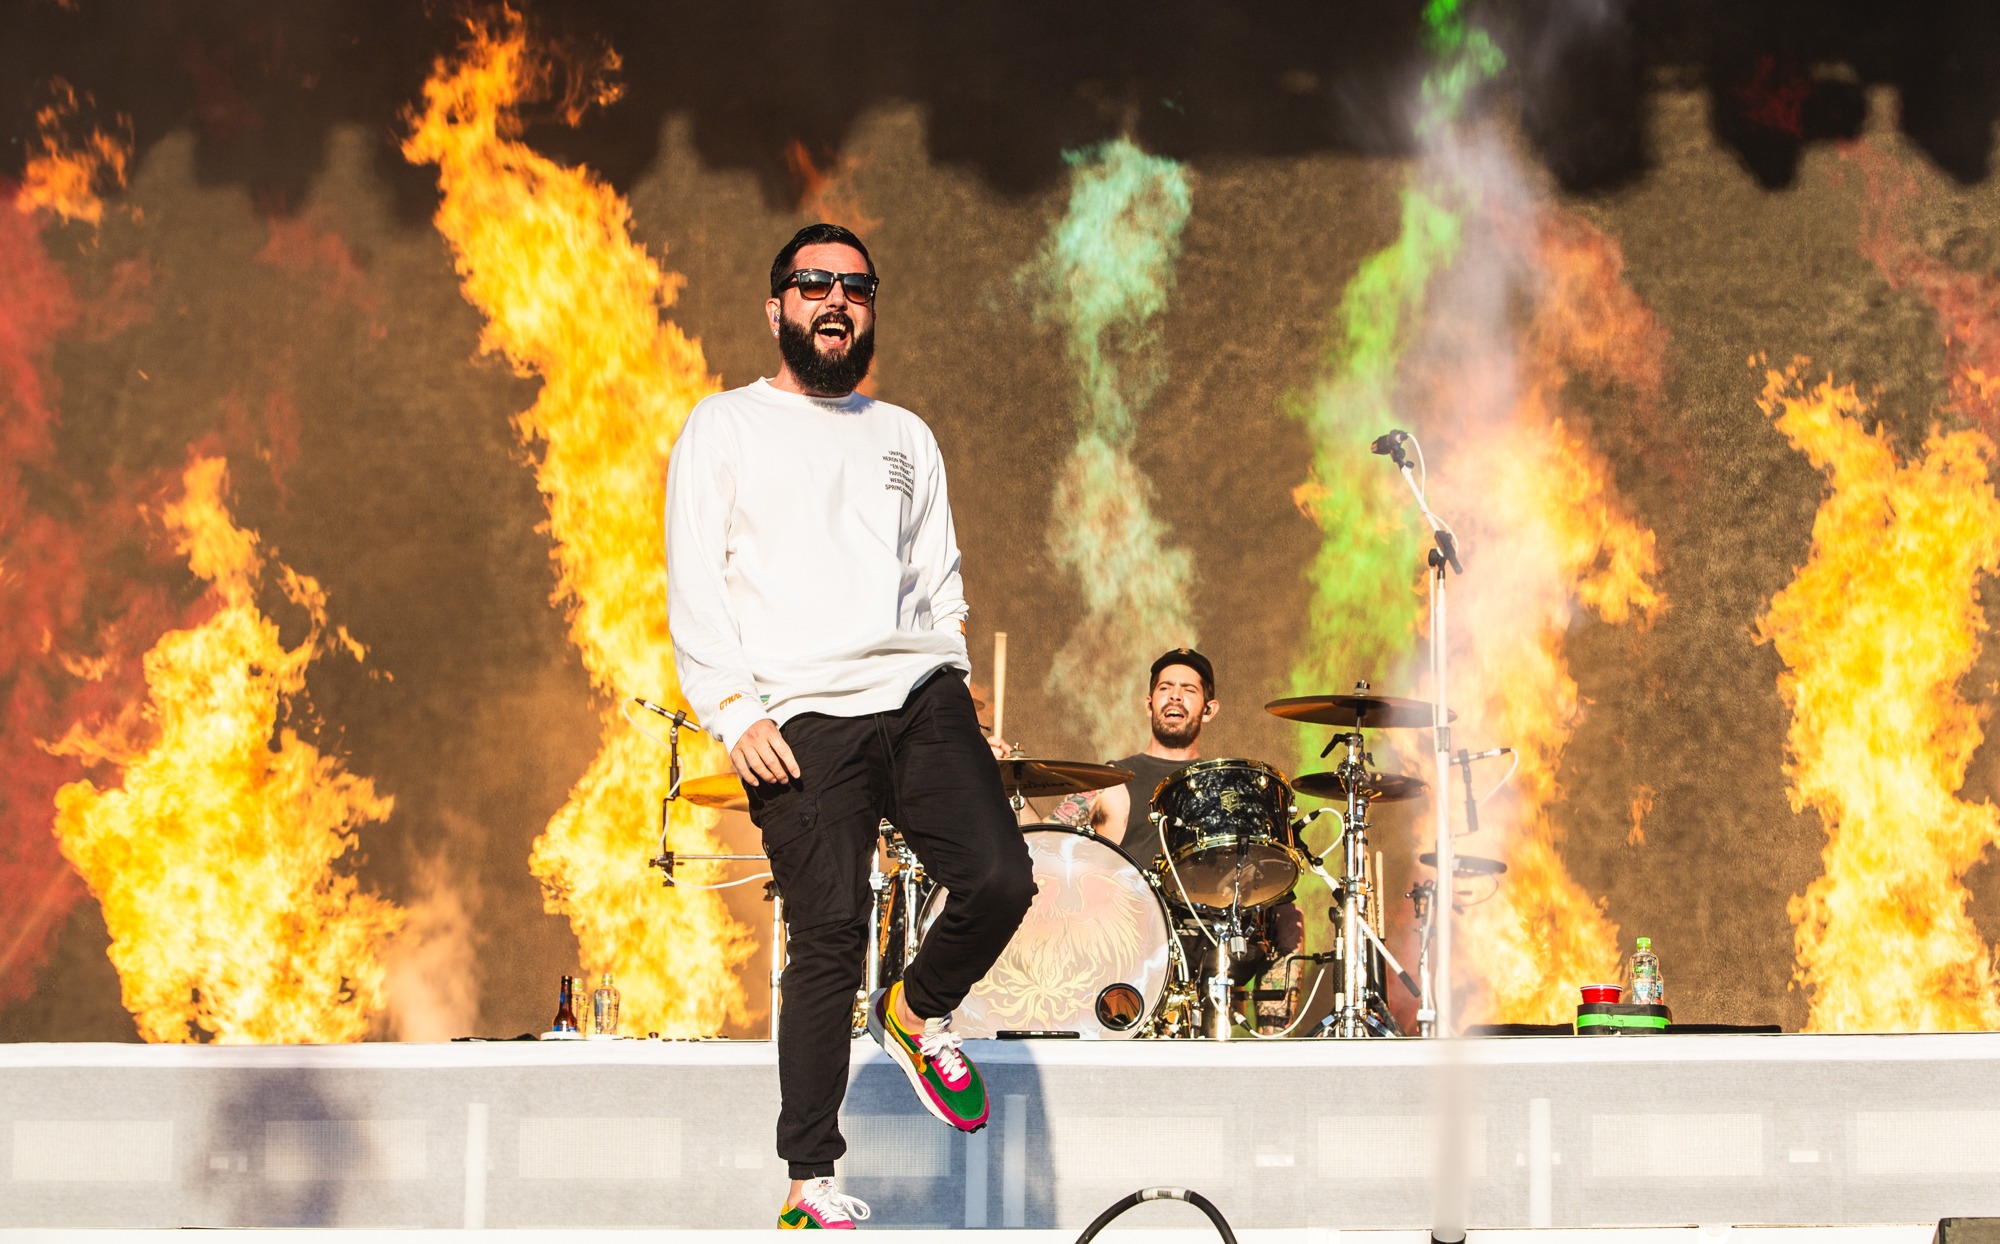 A Day To Remember on new album ‘You’re Welcome’: “We didn’t make you wait for no fucking reason”